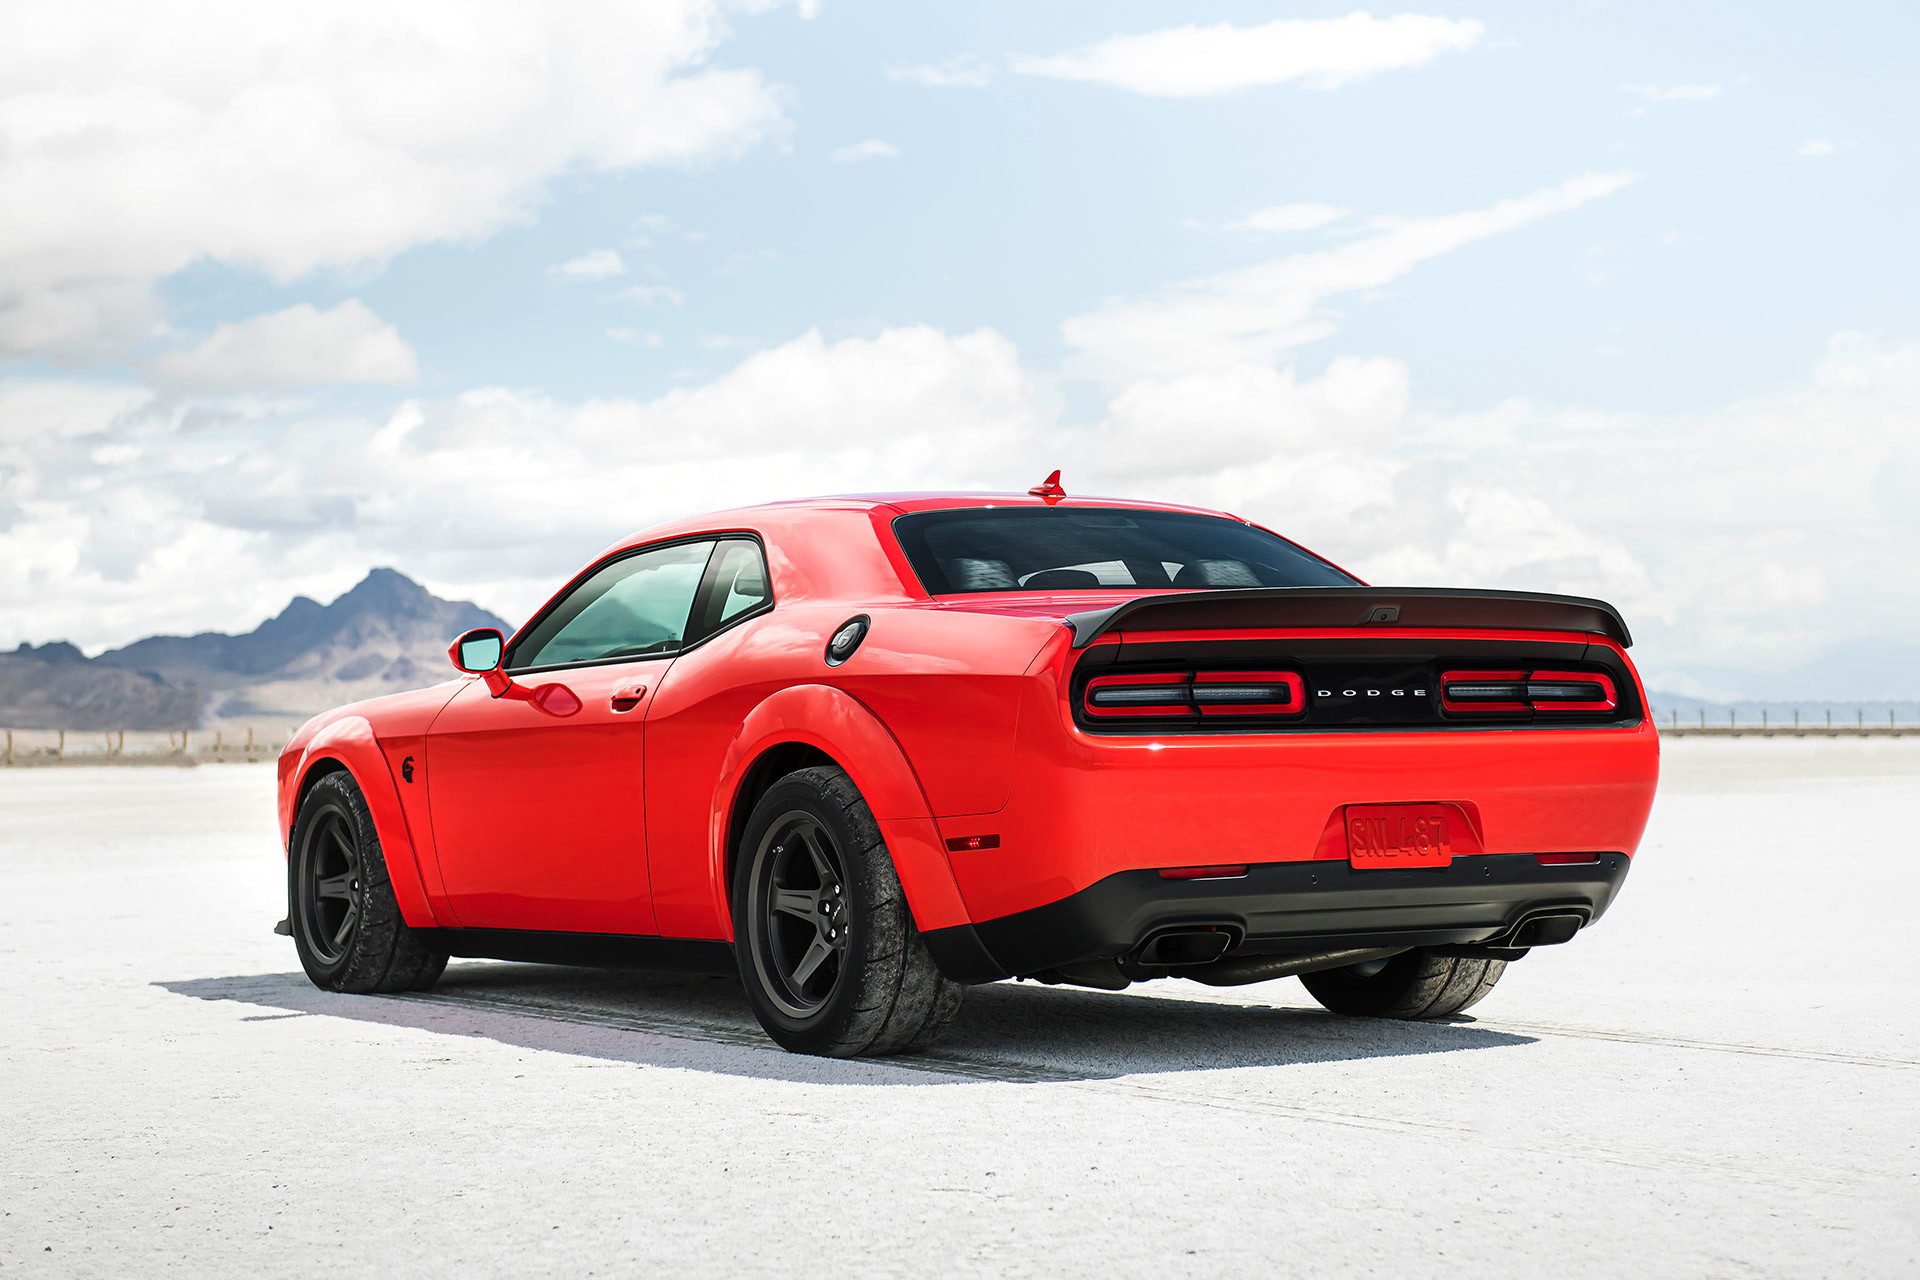 The rear view of a red 2022 Dodge Challenger, parked outdoors with mountains in the background.